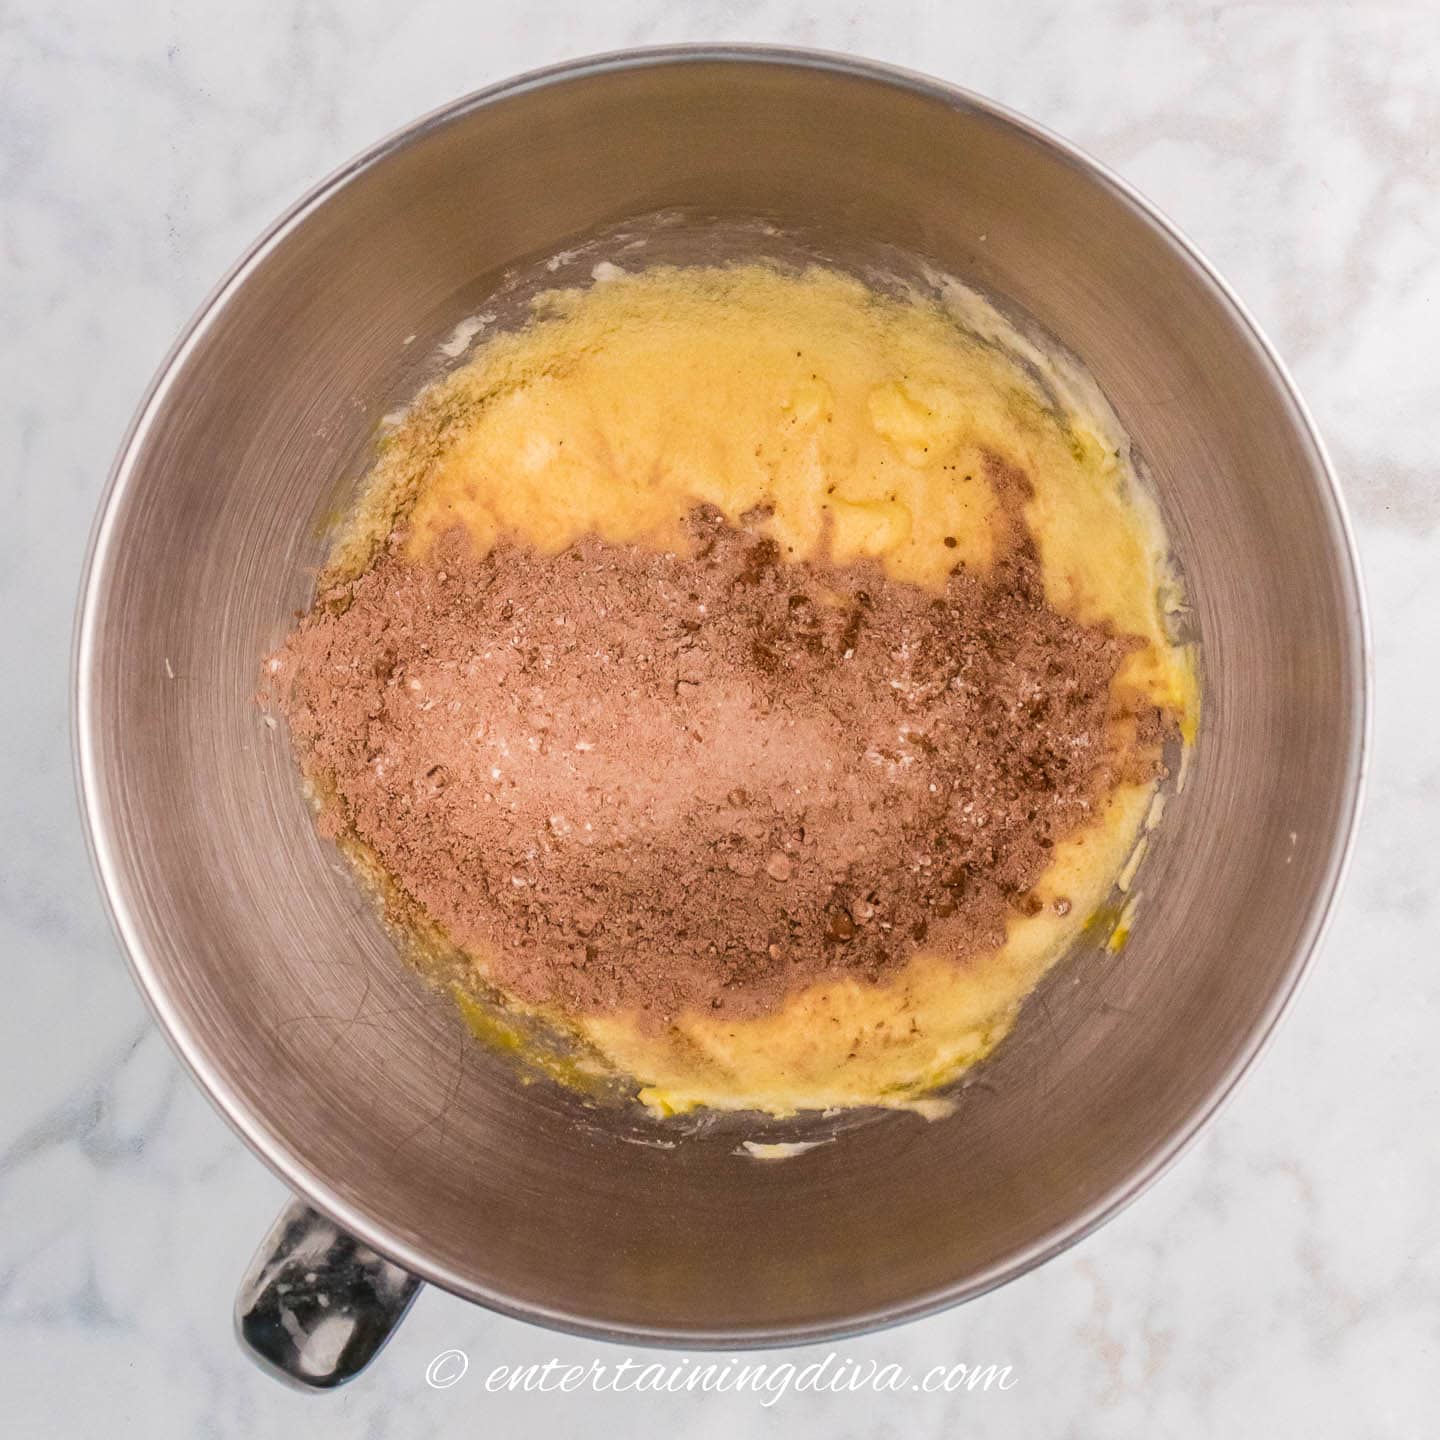 add together the dry ingredients of the chocolate zucchini bread to the butter mixture in a mixing bowl